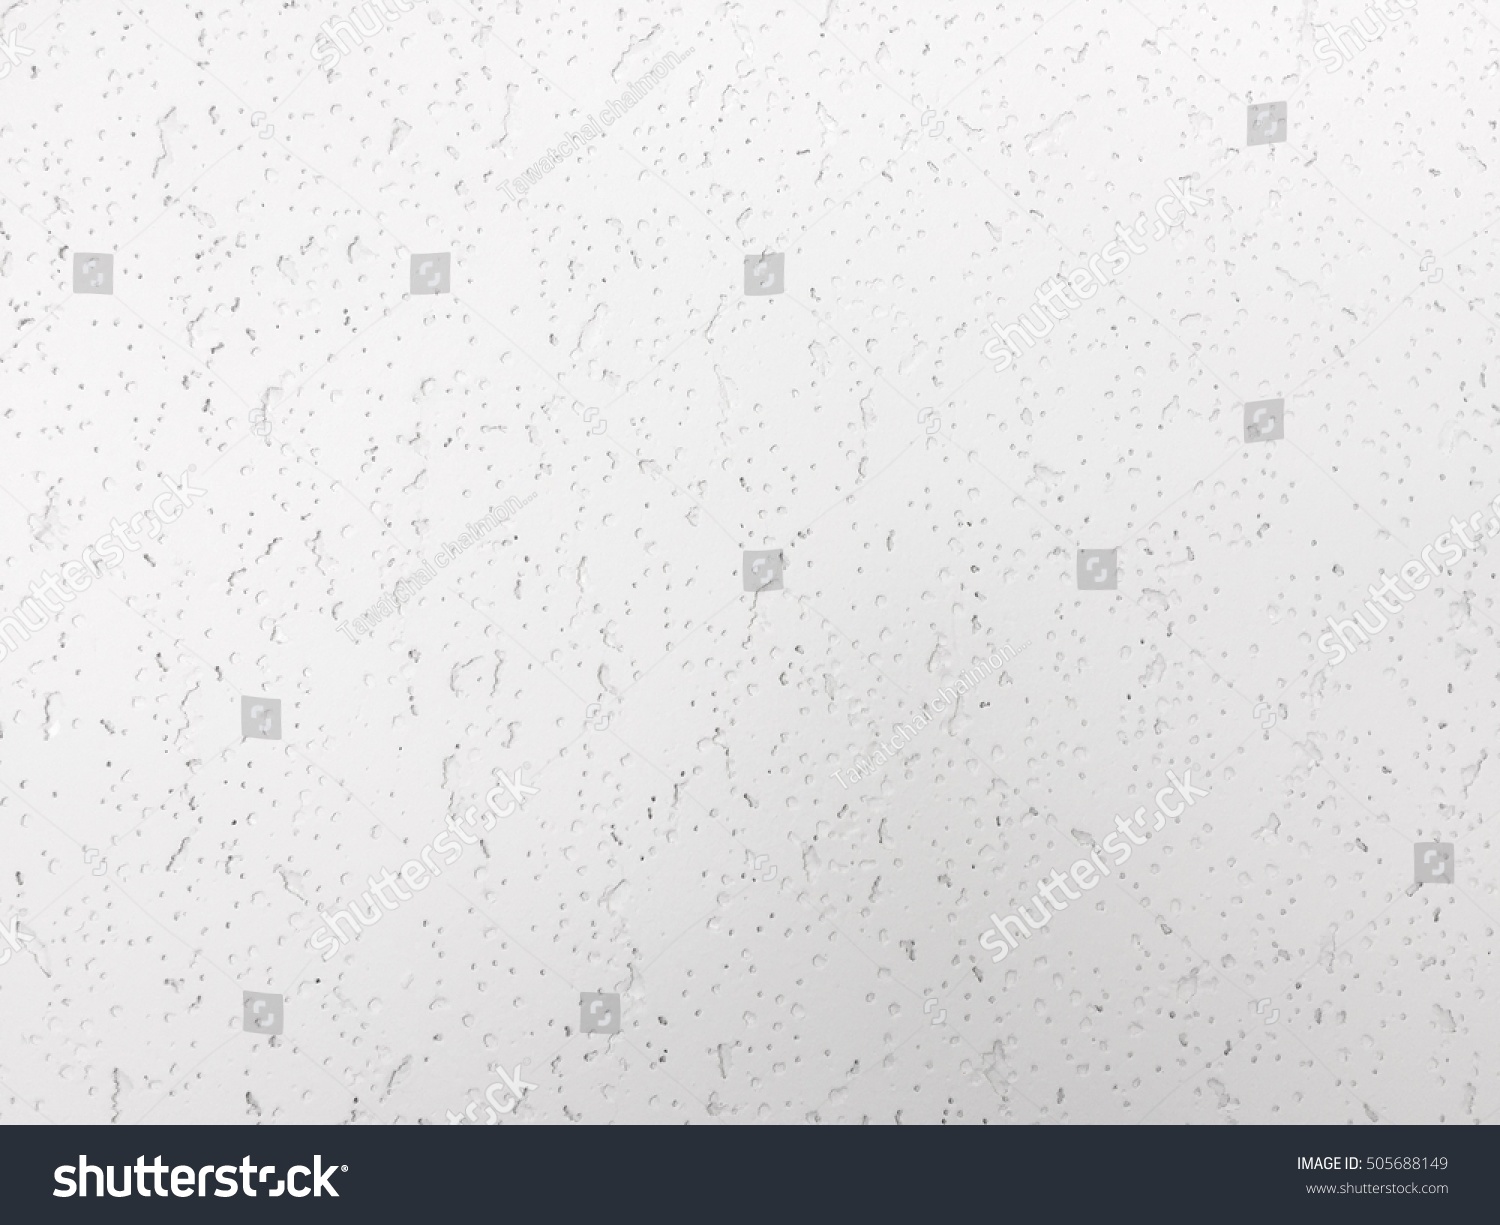 Acoustic Ceiling Board For Texture Stock Photo 505688149